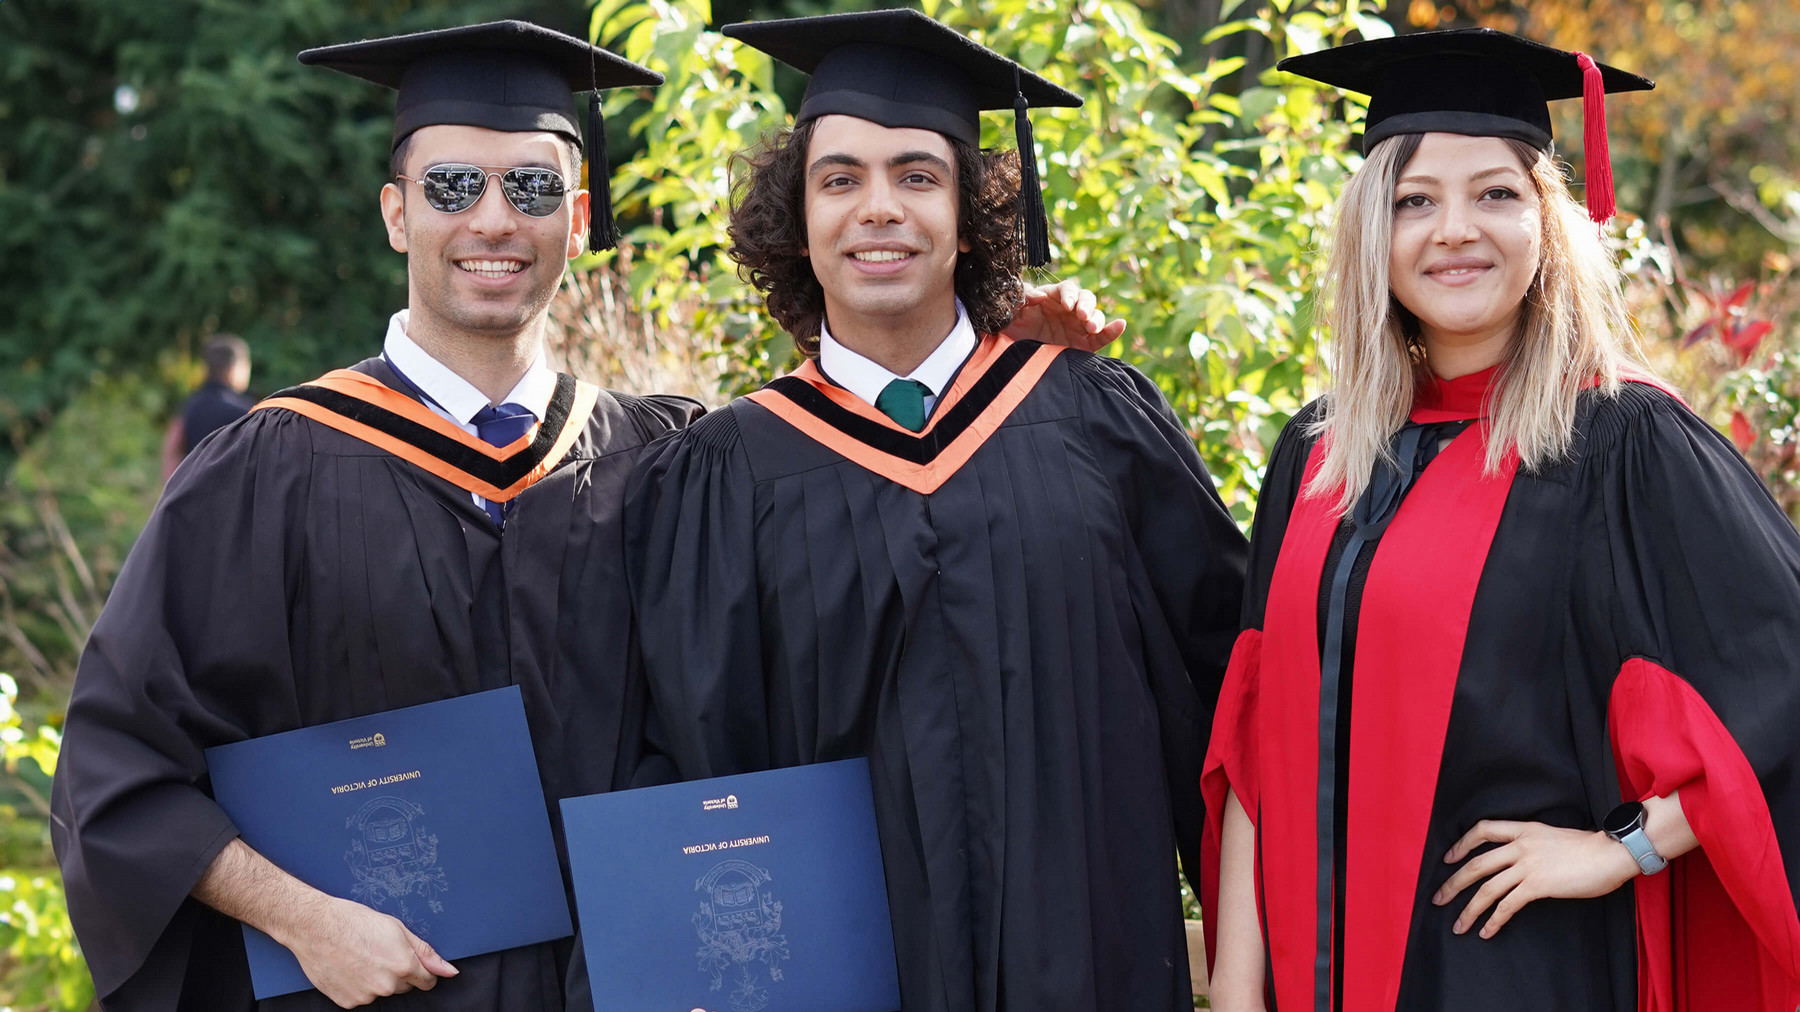 Three graduating students standing outdoors side by side smiling in graduation robes and hats holding diplomas.